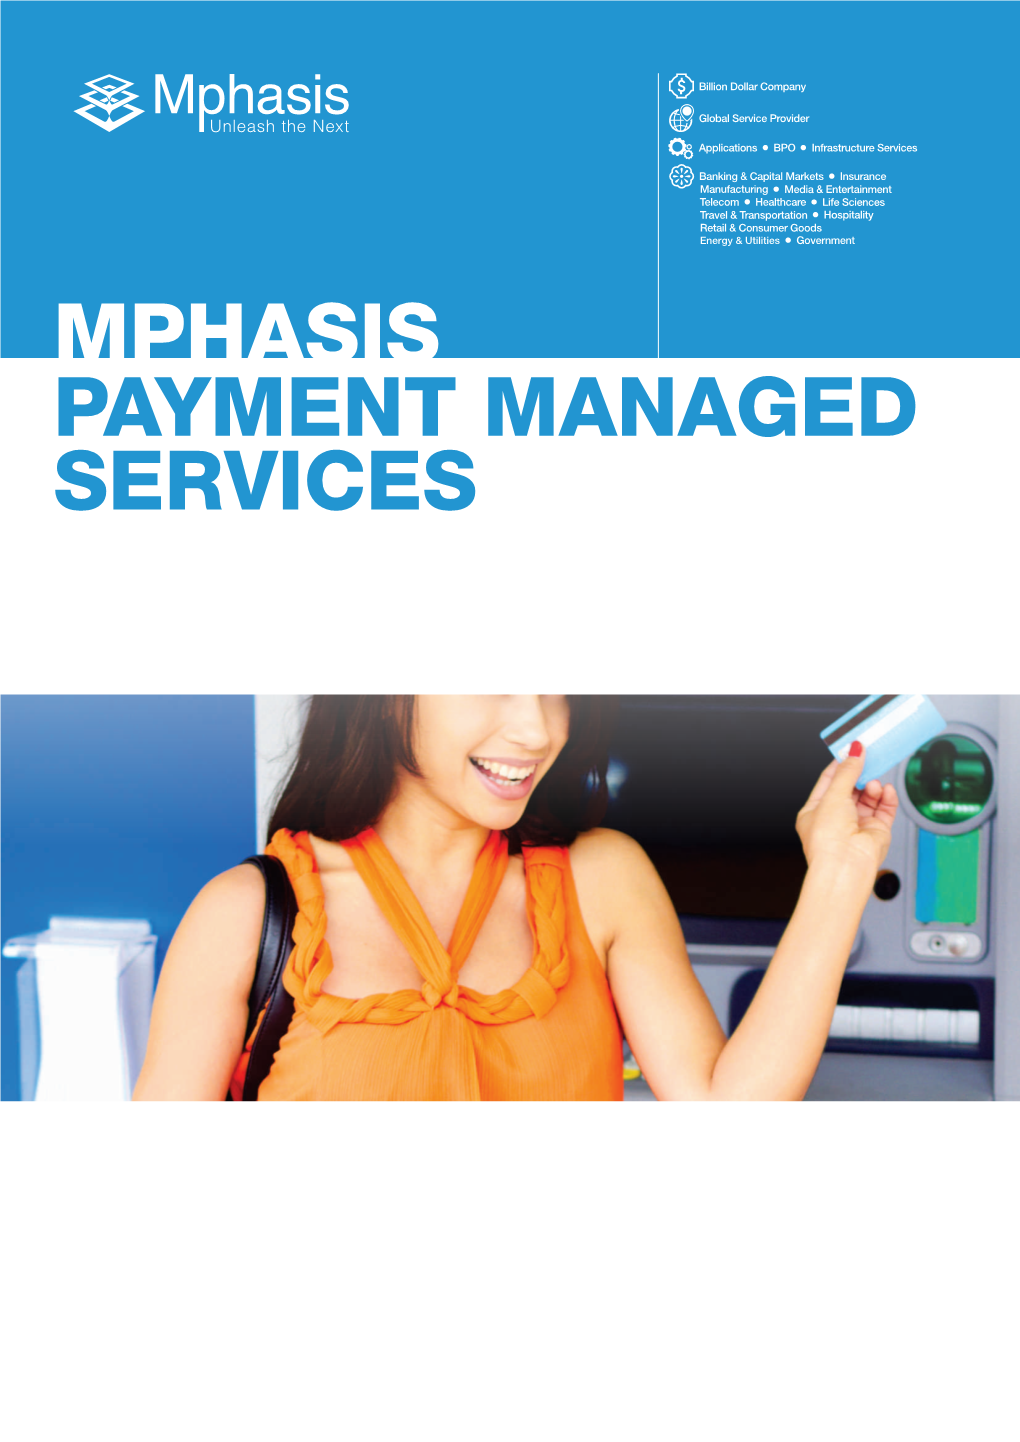 Mphasis Payment Managed Services